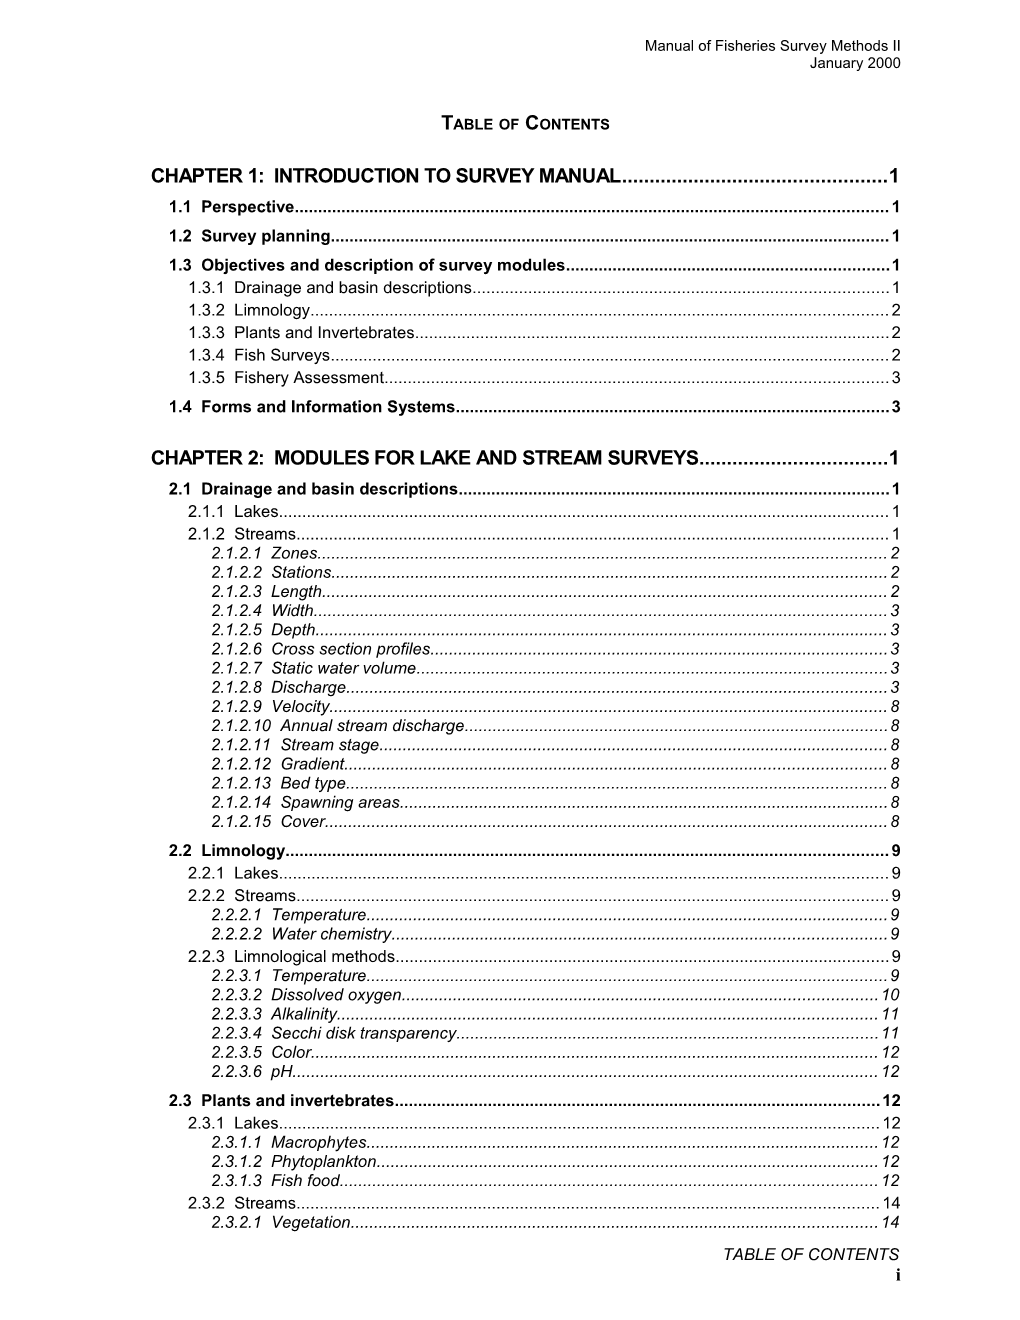 Chapter 1: Introduction to Survey Manual